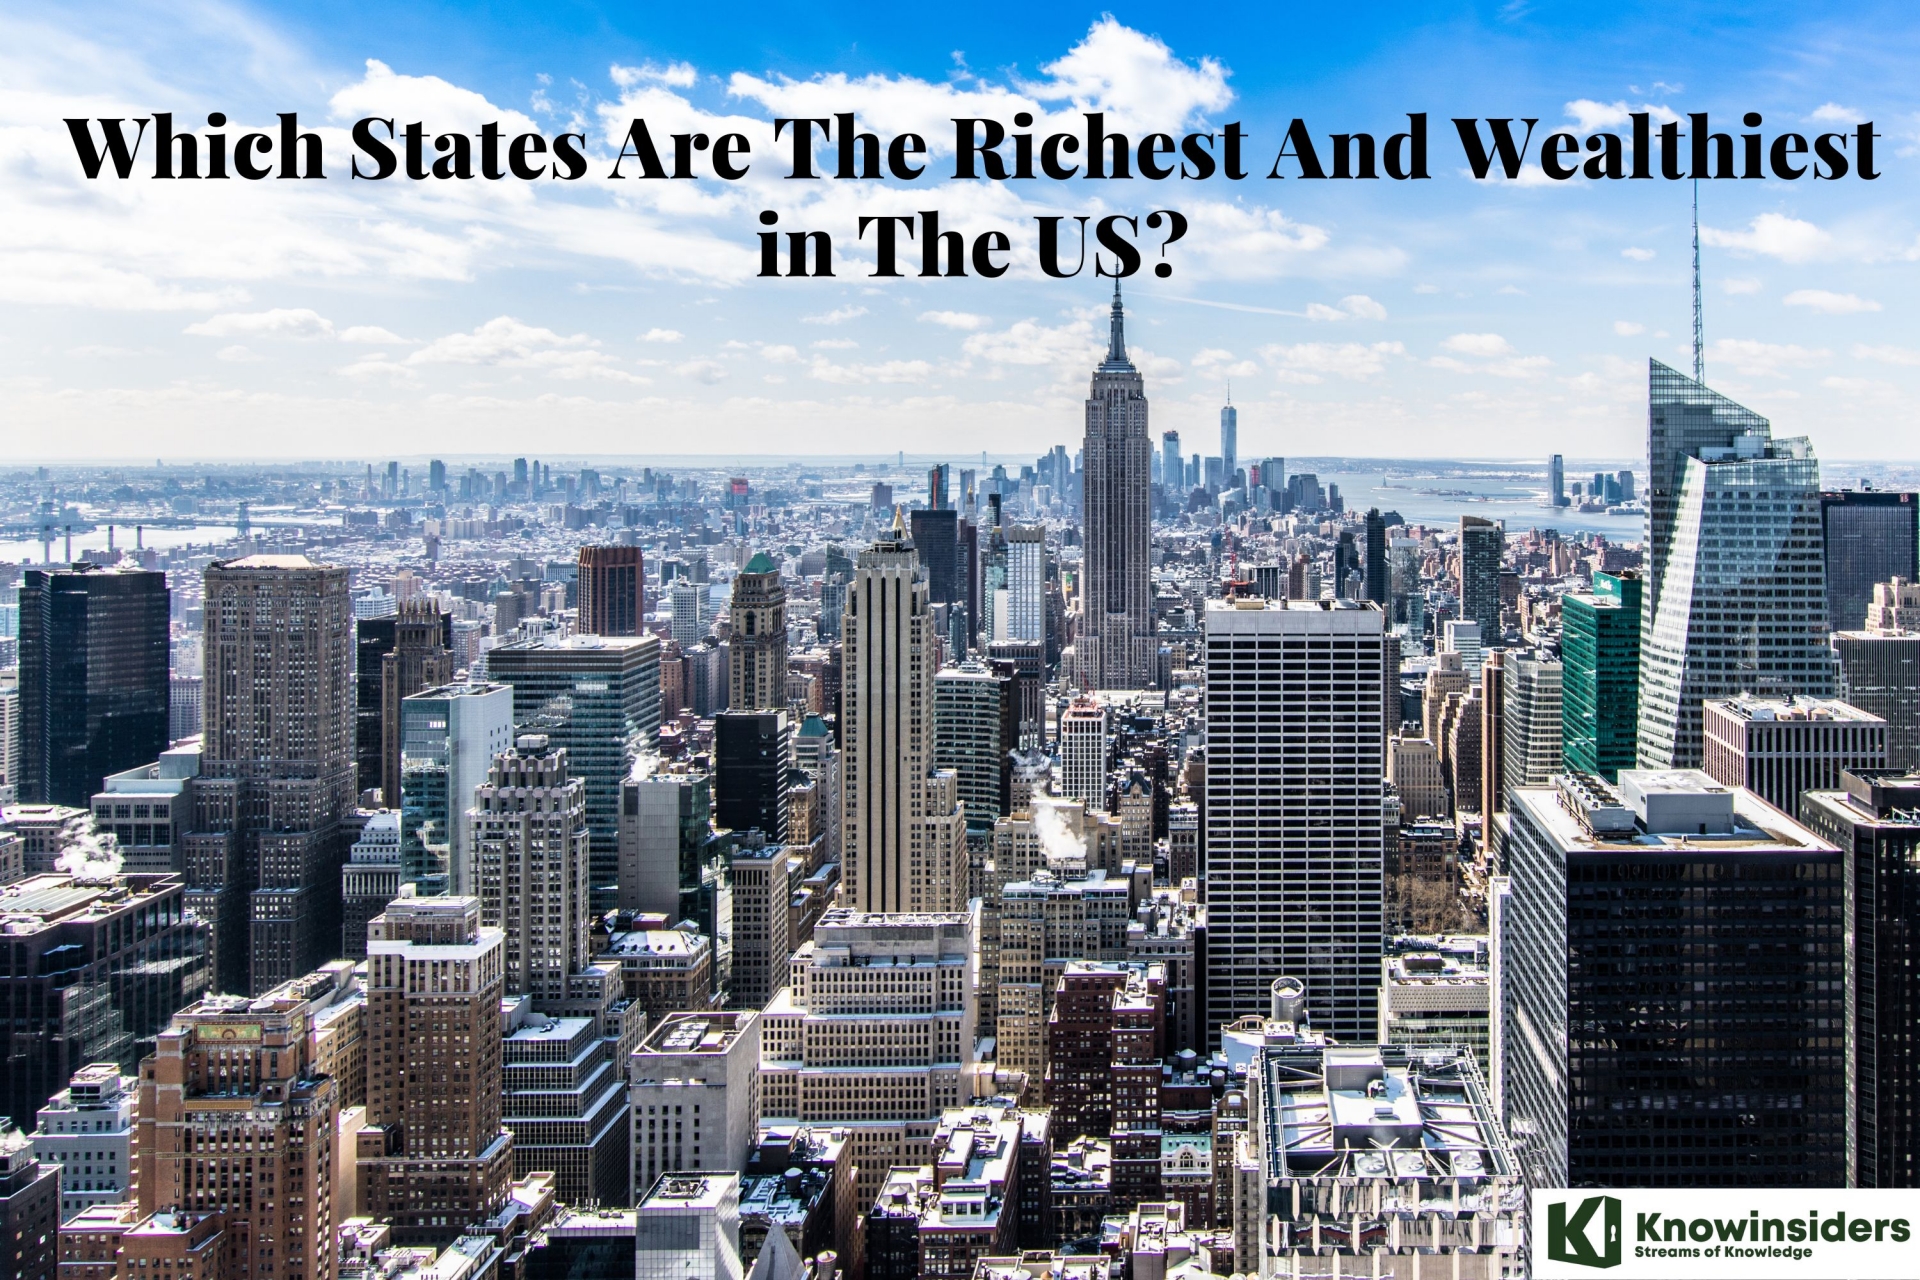 Which States Are The Richest And Wealthiest in The US?